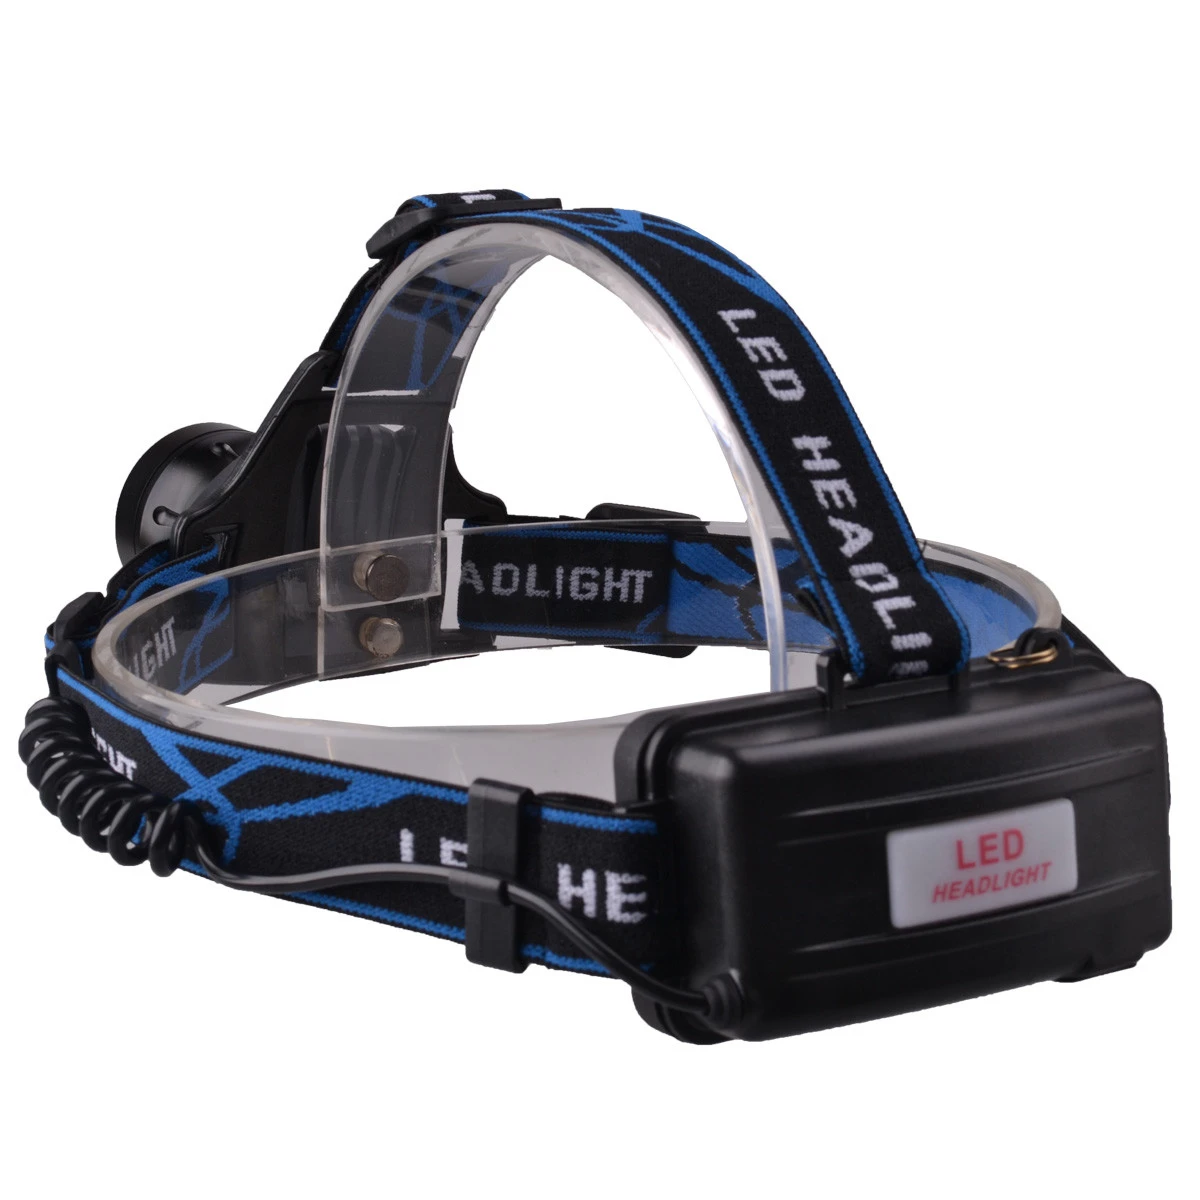 Waterproof Zoomable T6 LED Headlamp Headlight Flashlight Head Torch Camping